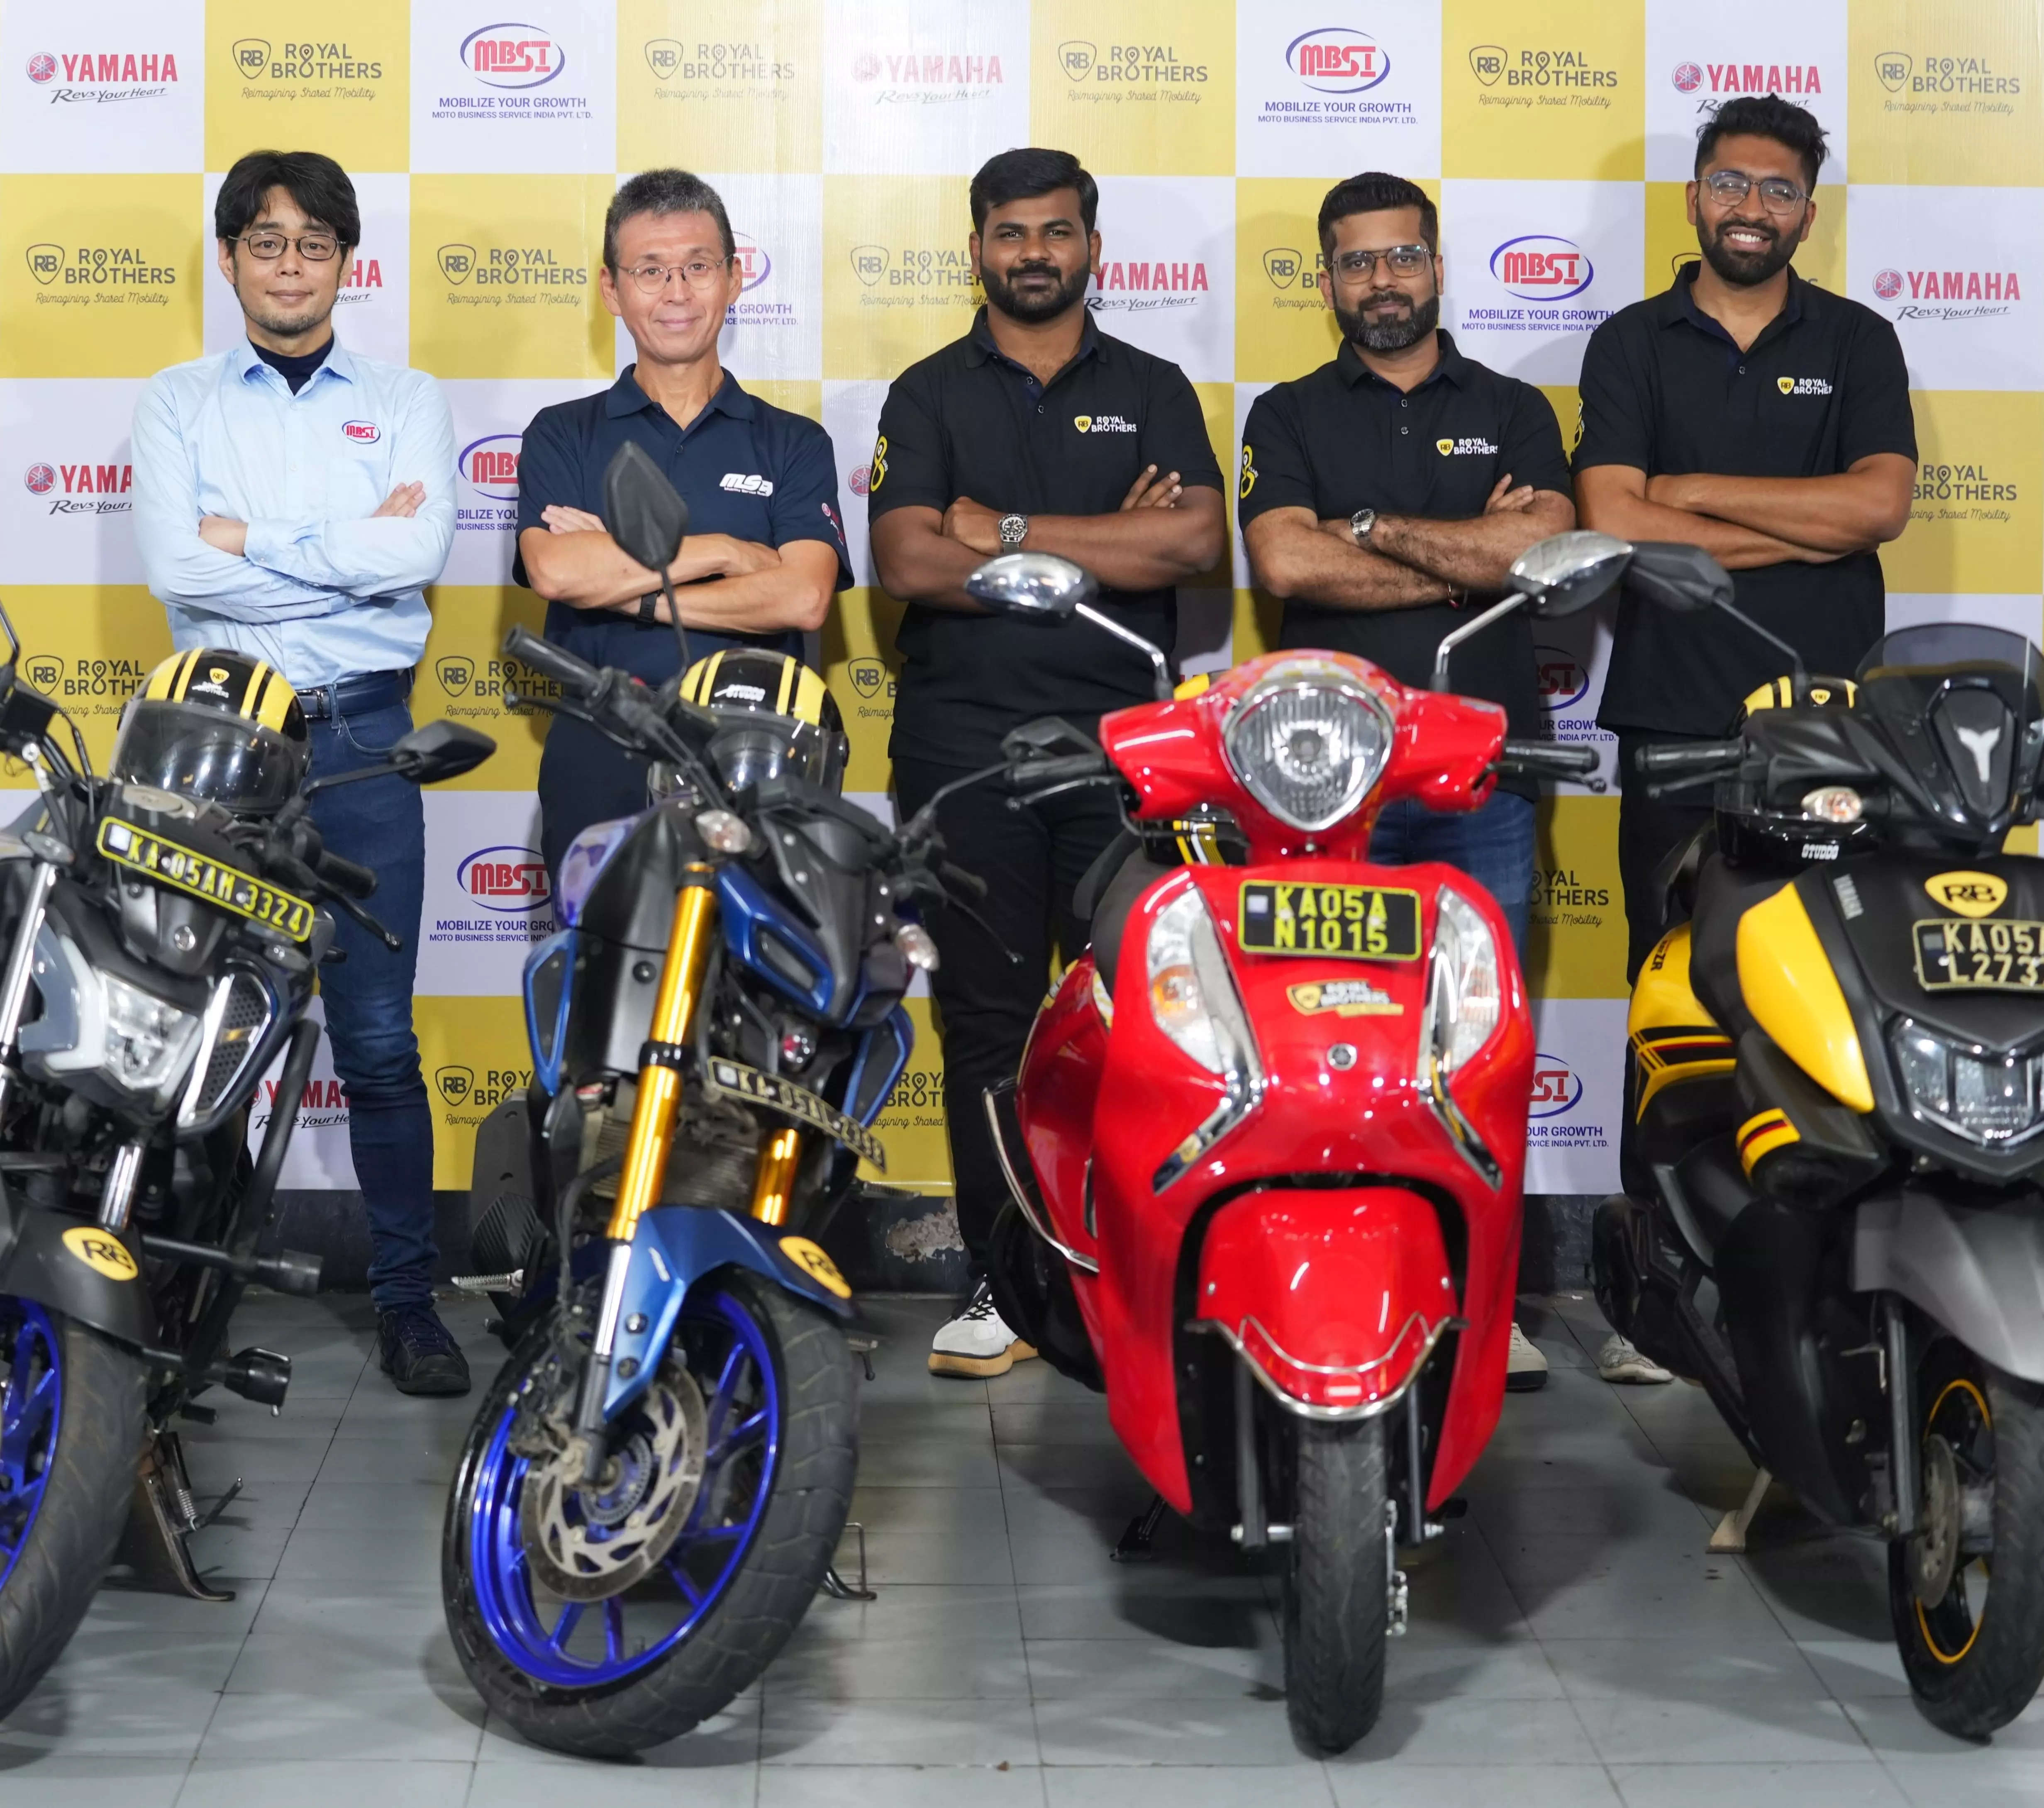 <p>MBSI has, consequently, been forging strategic partnerships with local players and recently made an investment in Royal Brothers which is focused on the rental bike business.<br></p>